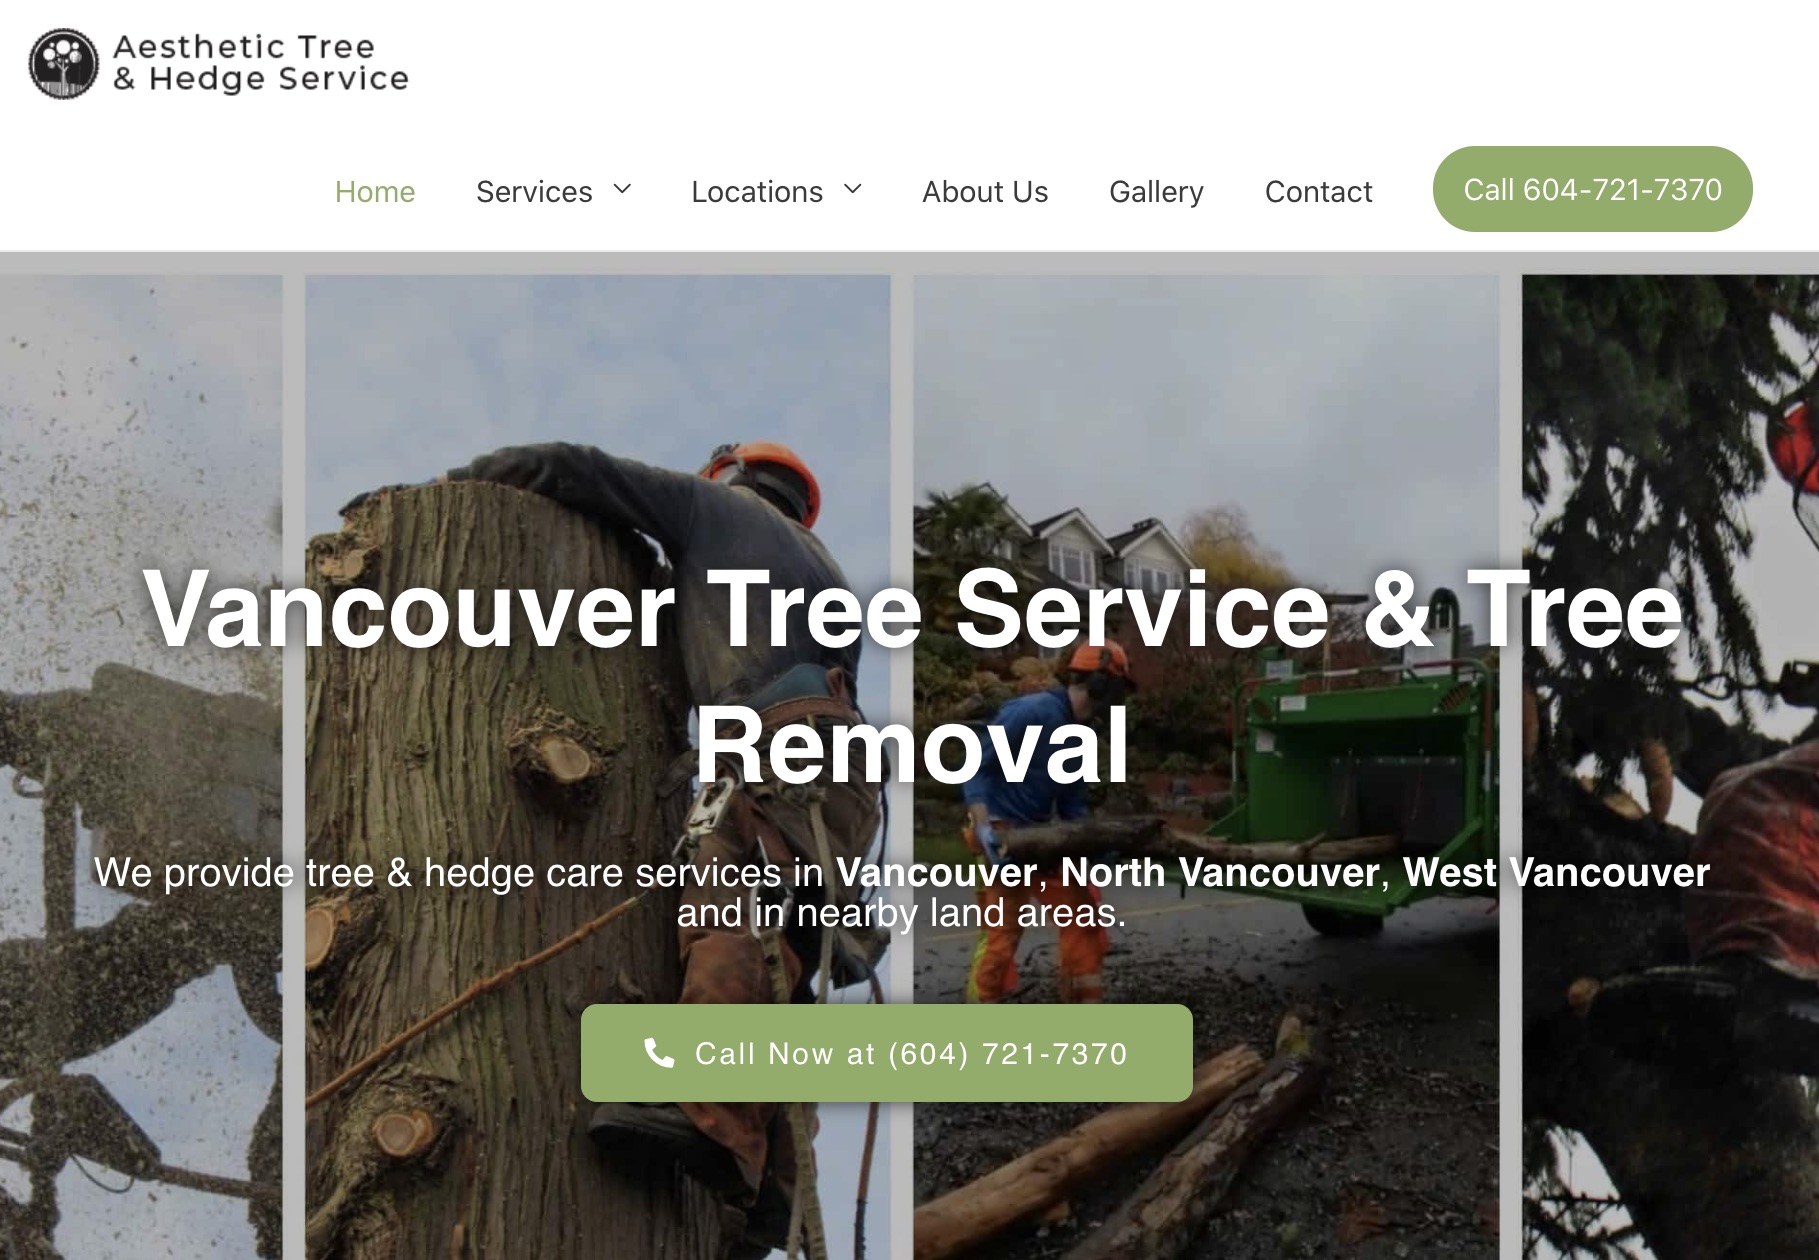 Aesthetic Tree & Hedge Services